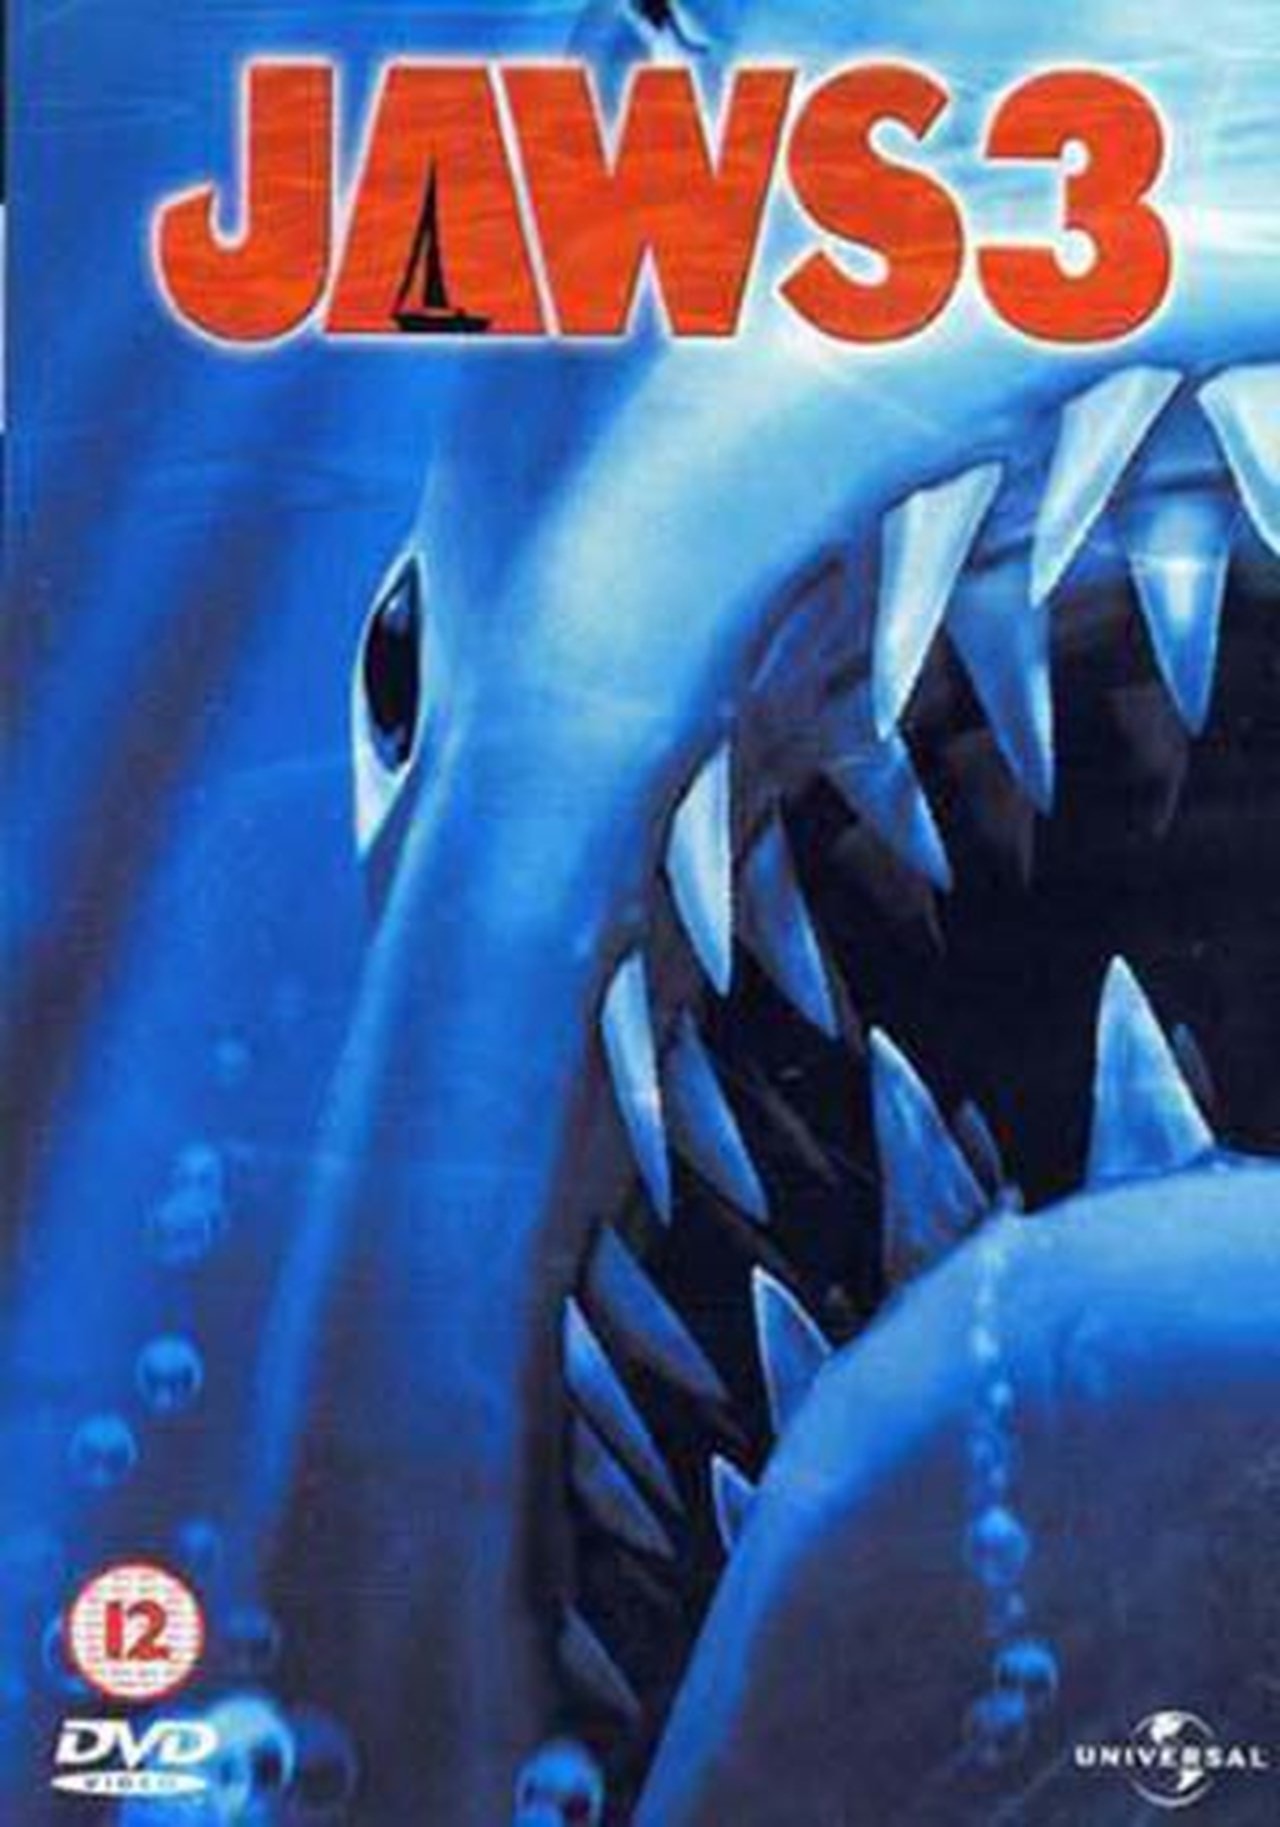 Jaws 3 | DVD | Free shipping over £20 | HMV Store